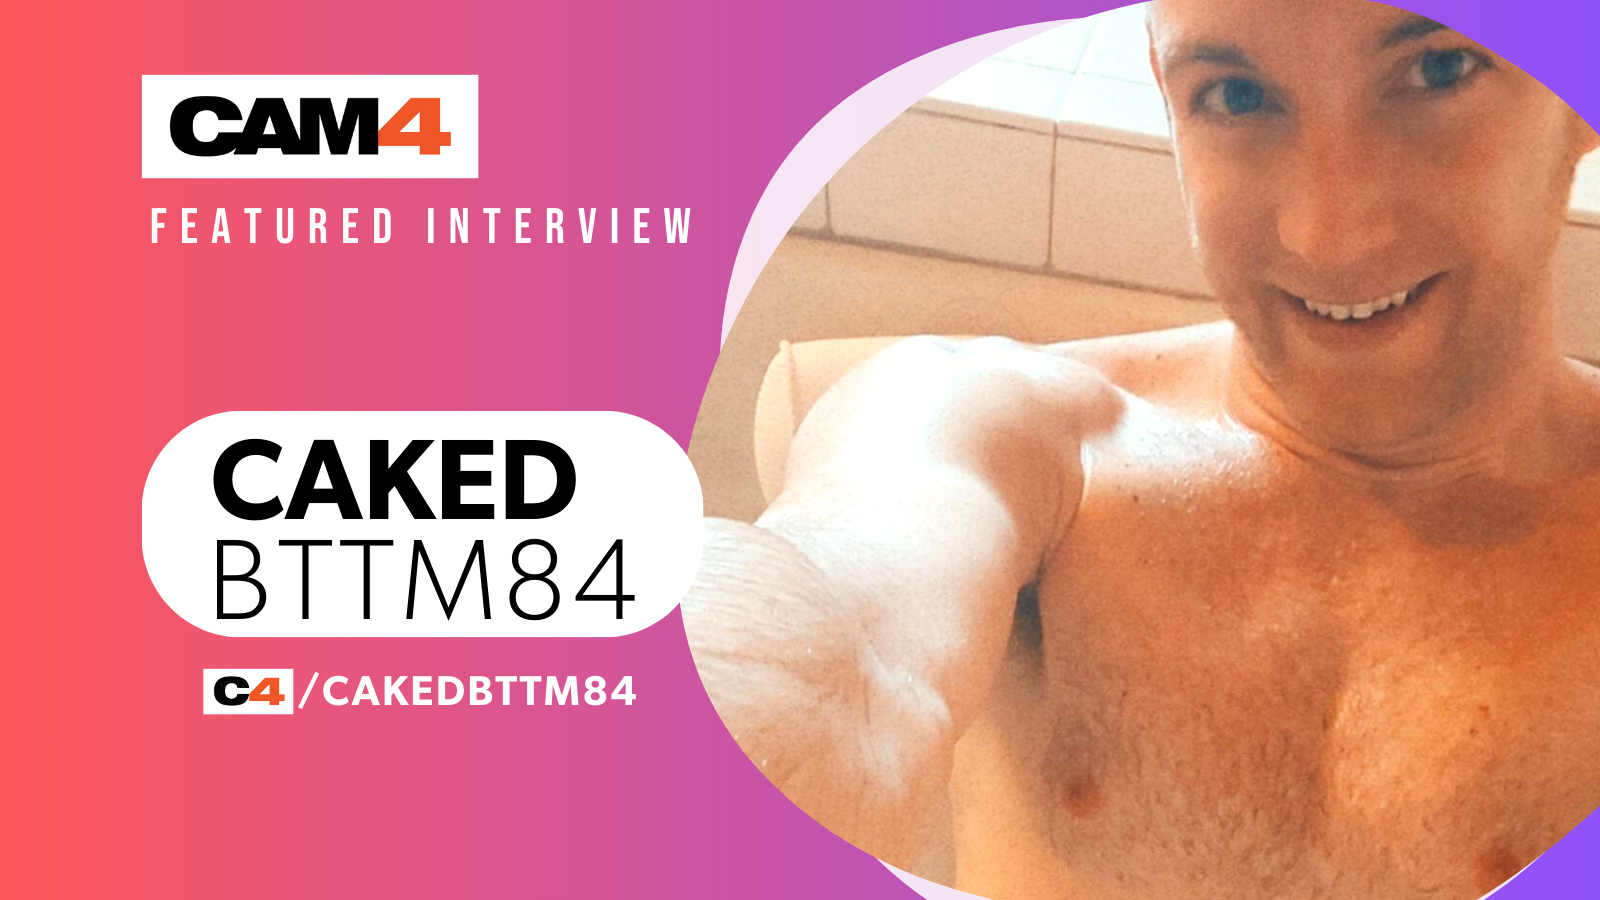 Having His Cake and Eating It: CakedBttm84 is Smashing It as a Content Creator